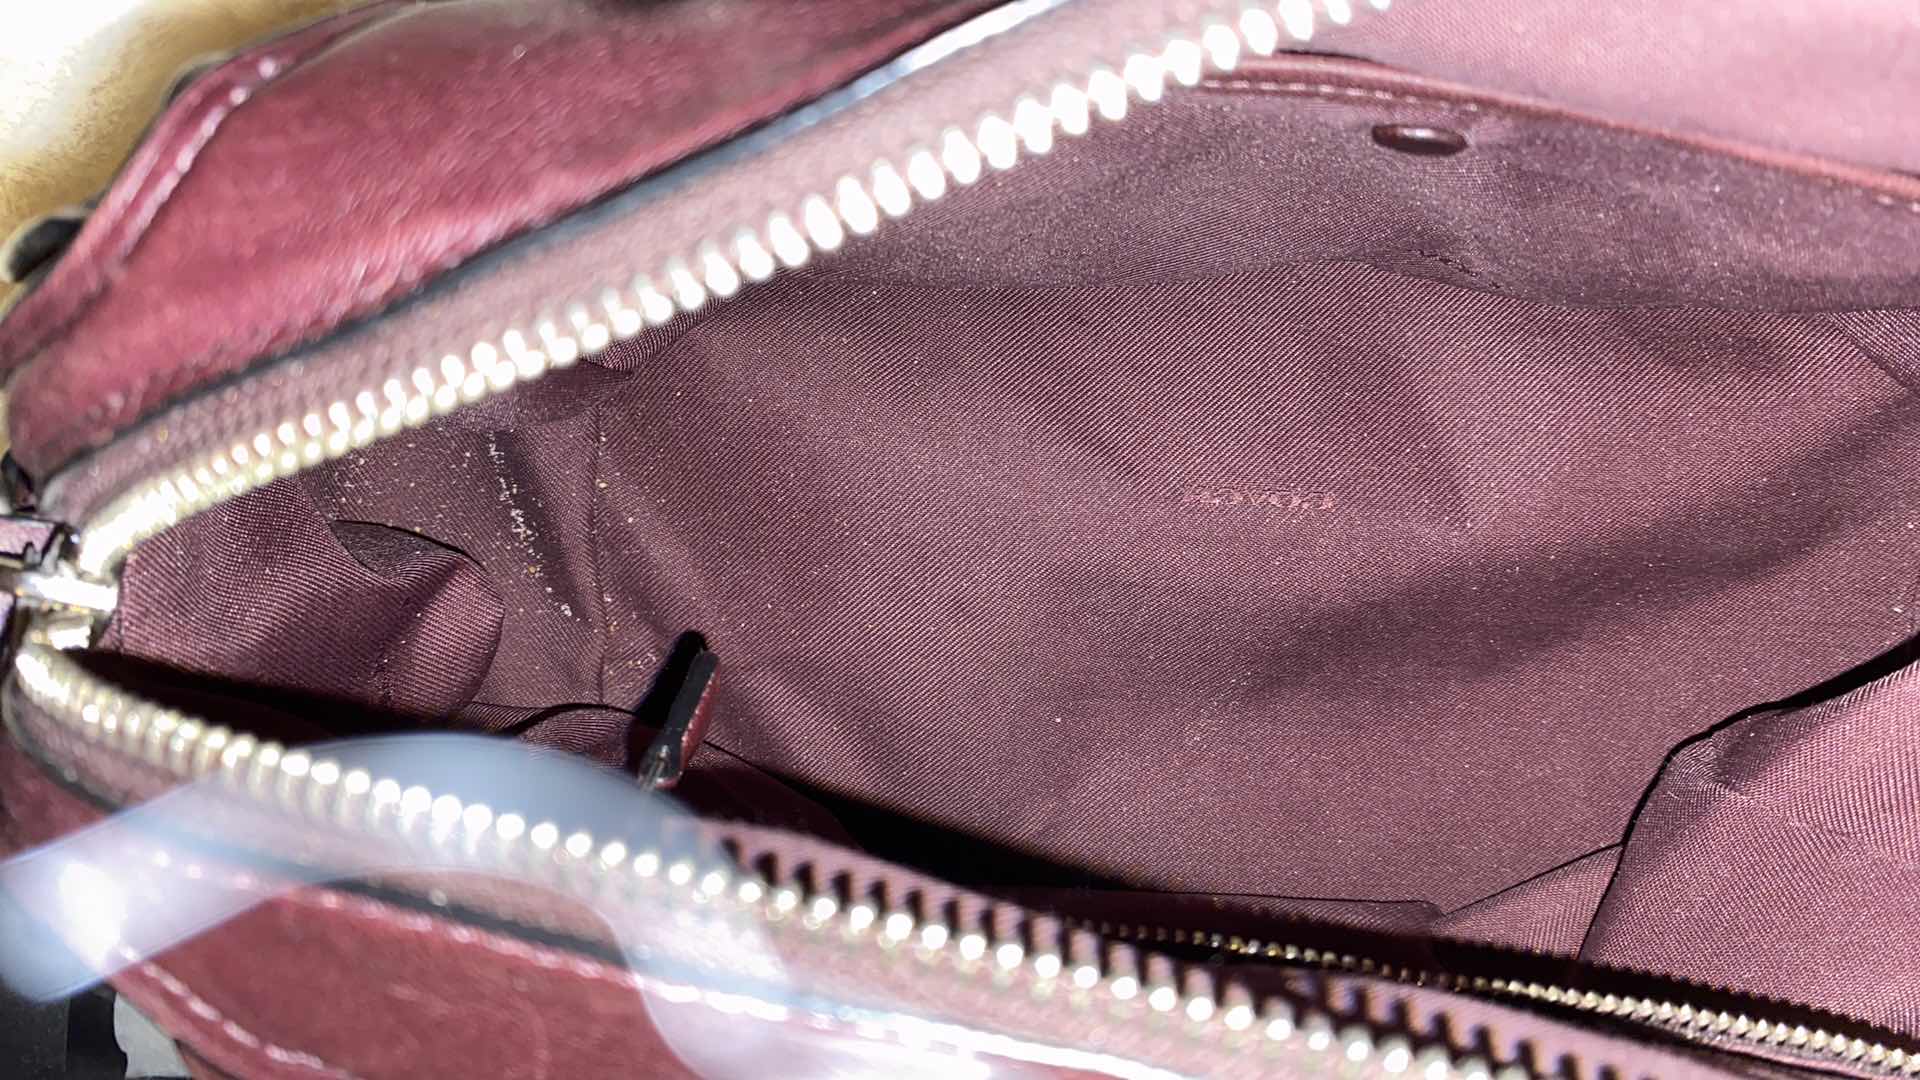 Photo 9 of $869 AUTHENTIC COACH ACE SATCHEL IN BURGUNDY WITH STRAP, WHIPSTITCHED HANDLES AND GUNMETAL HARDWARE INCLUDES DUSTBAG- NON RETURABLE - FINAL SALE